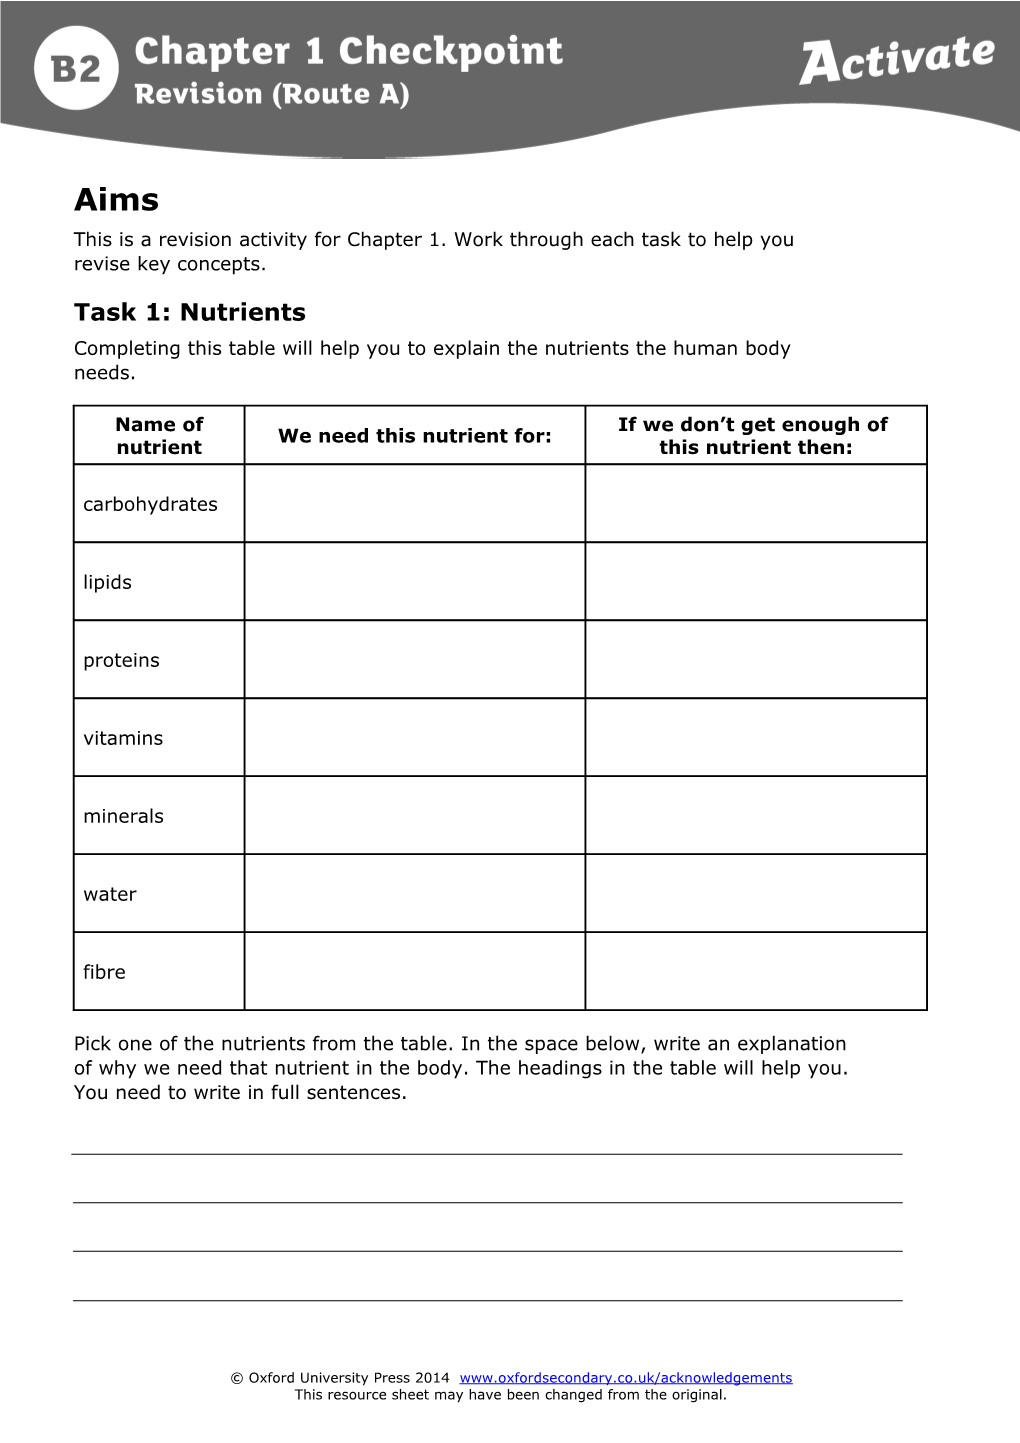 This Is a Revision Activity for Chapter 1. Work Through Each Task to Help You Revise Key